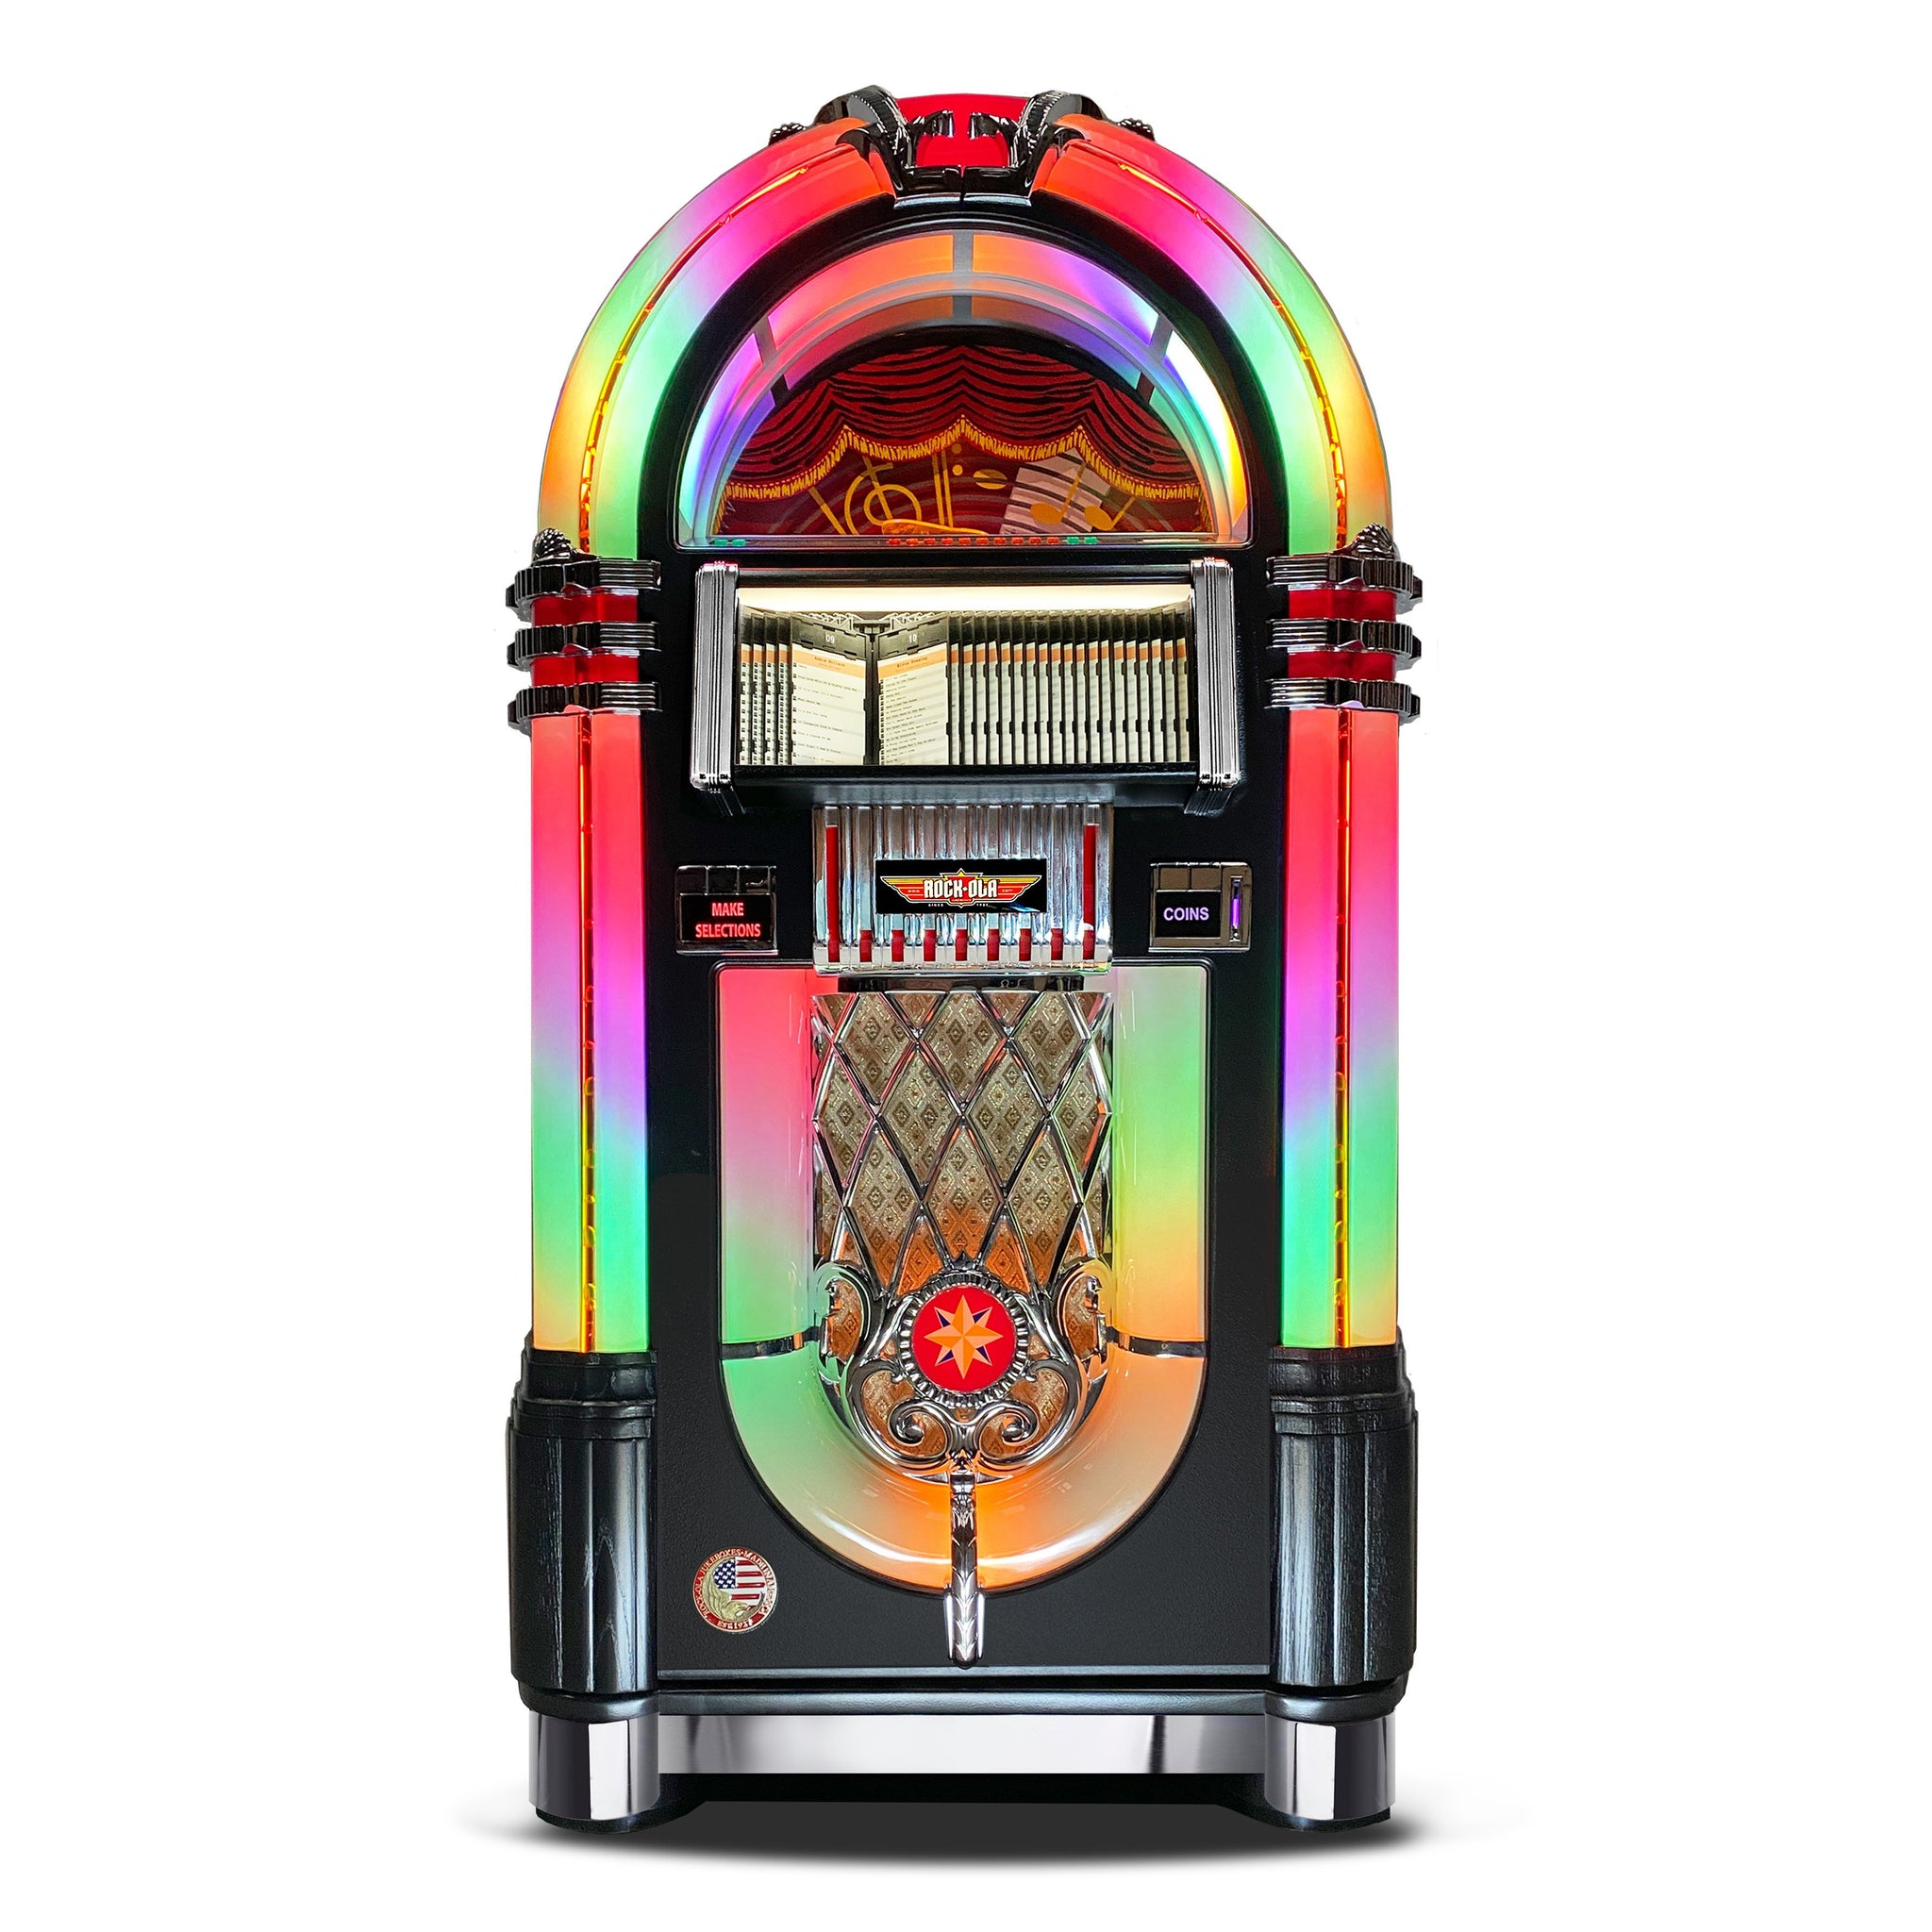 Rock-Ola Bubbler CD Jukebox in Black with Bluetooth